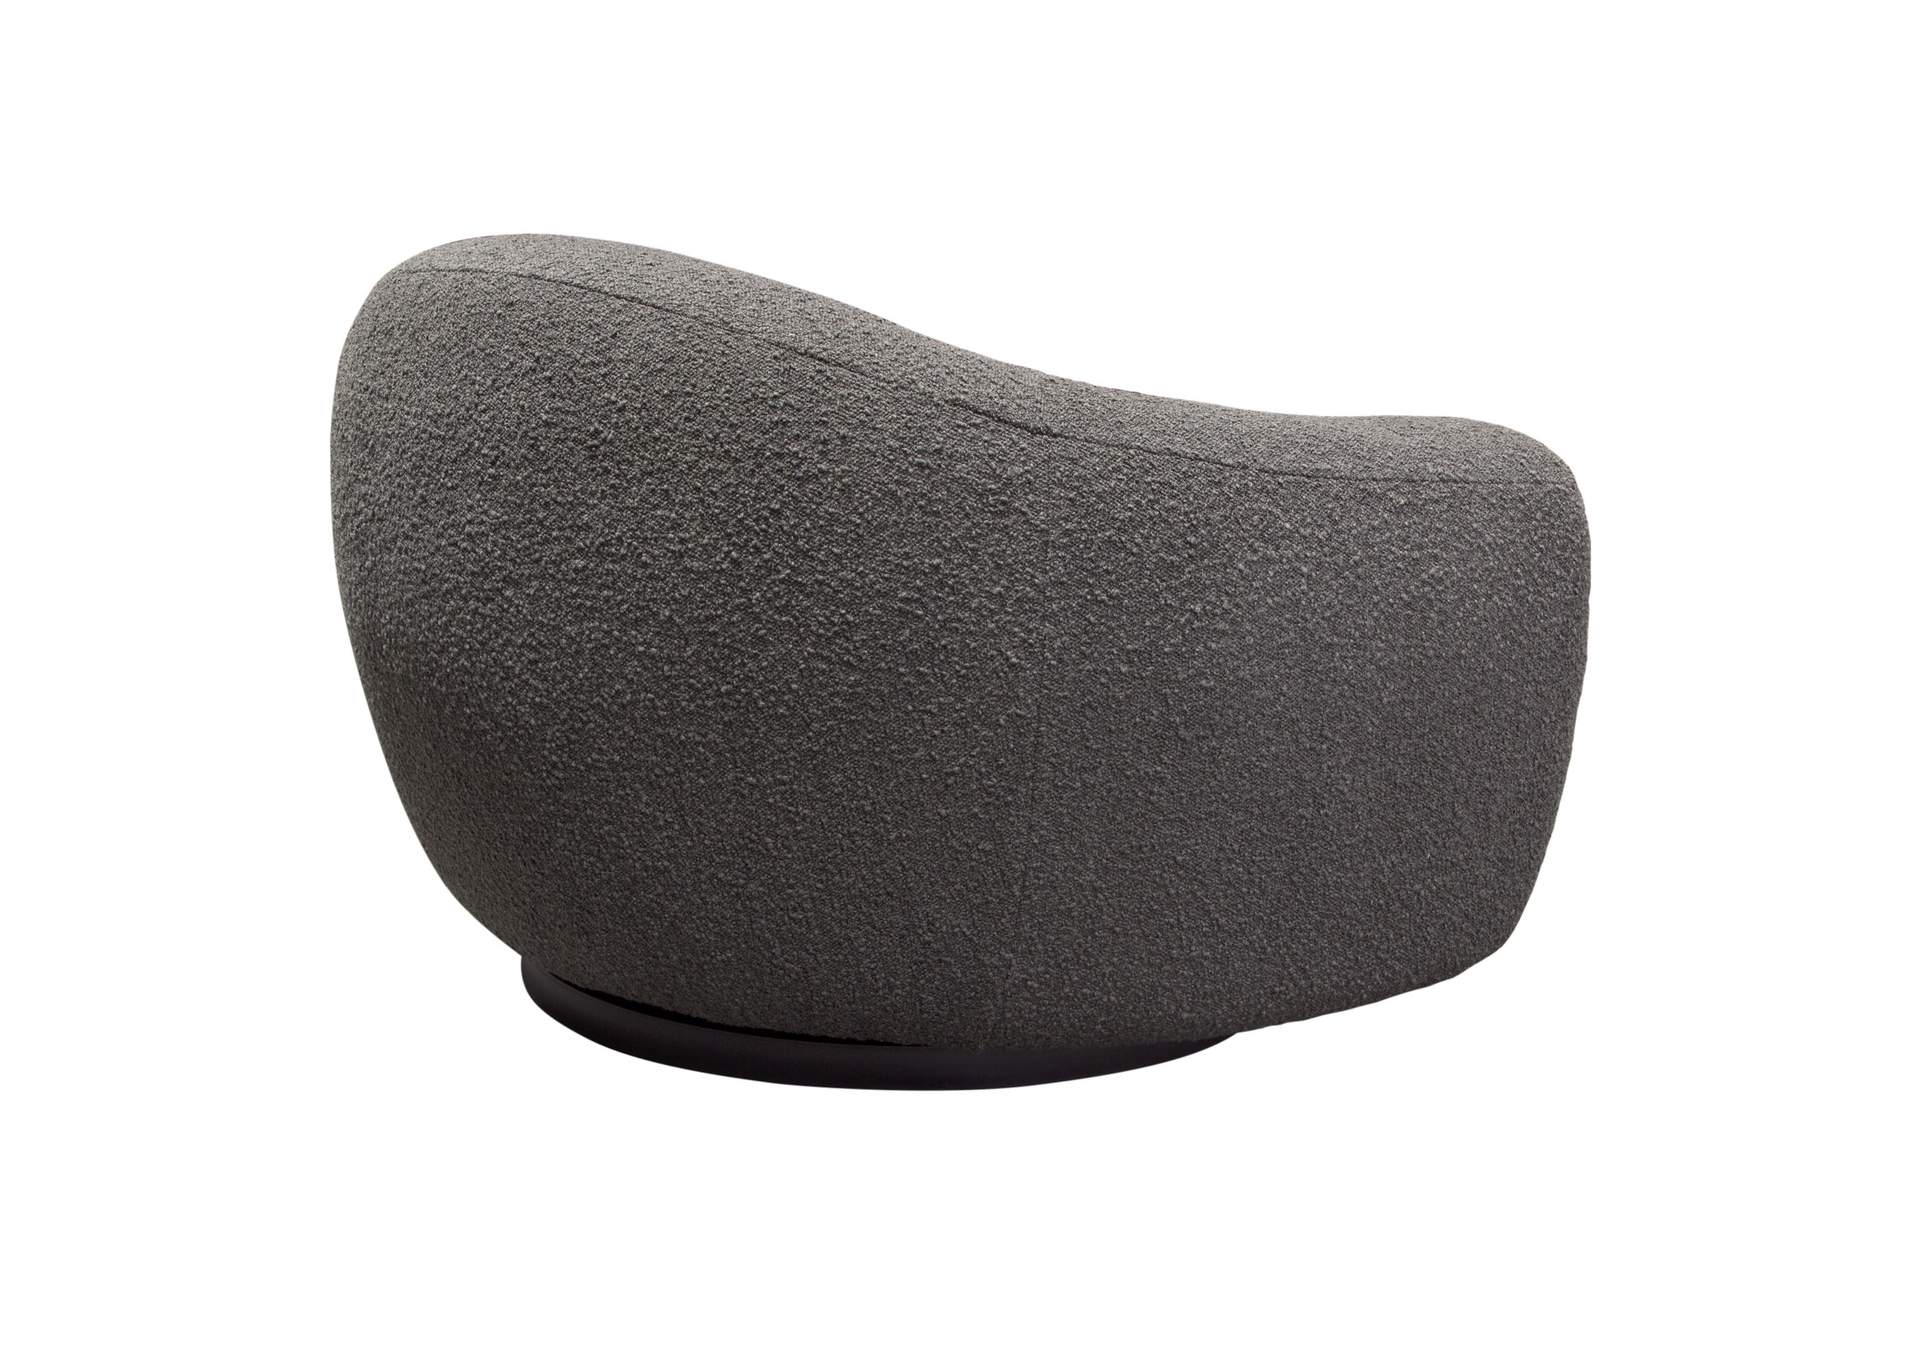 Pascal Swivel Chair in Charcoal Boucle Textured Fabric w/ Contoured Arms & Back by Diamond Sofa,Diamond Sofa